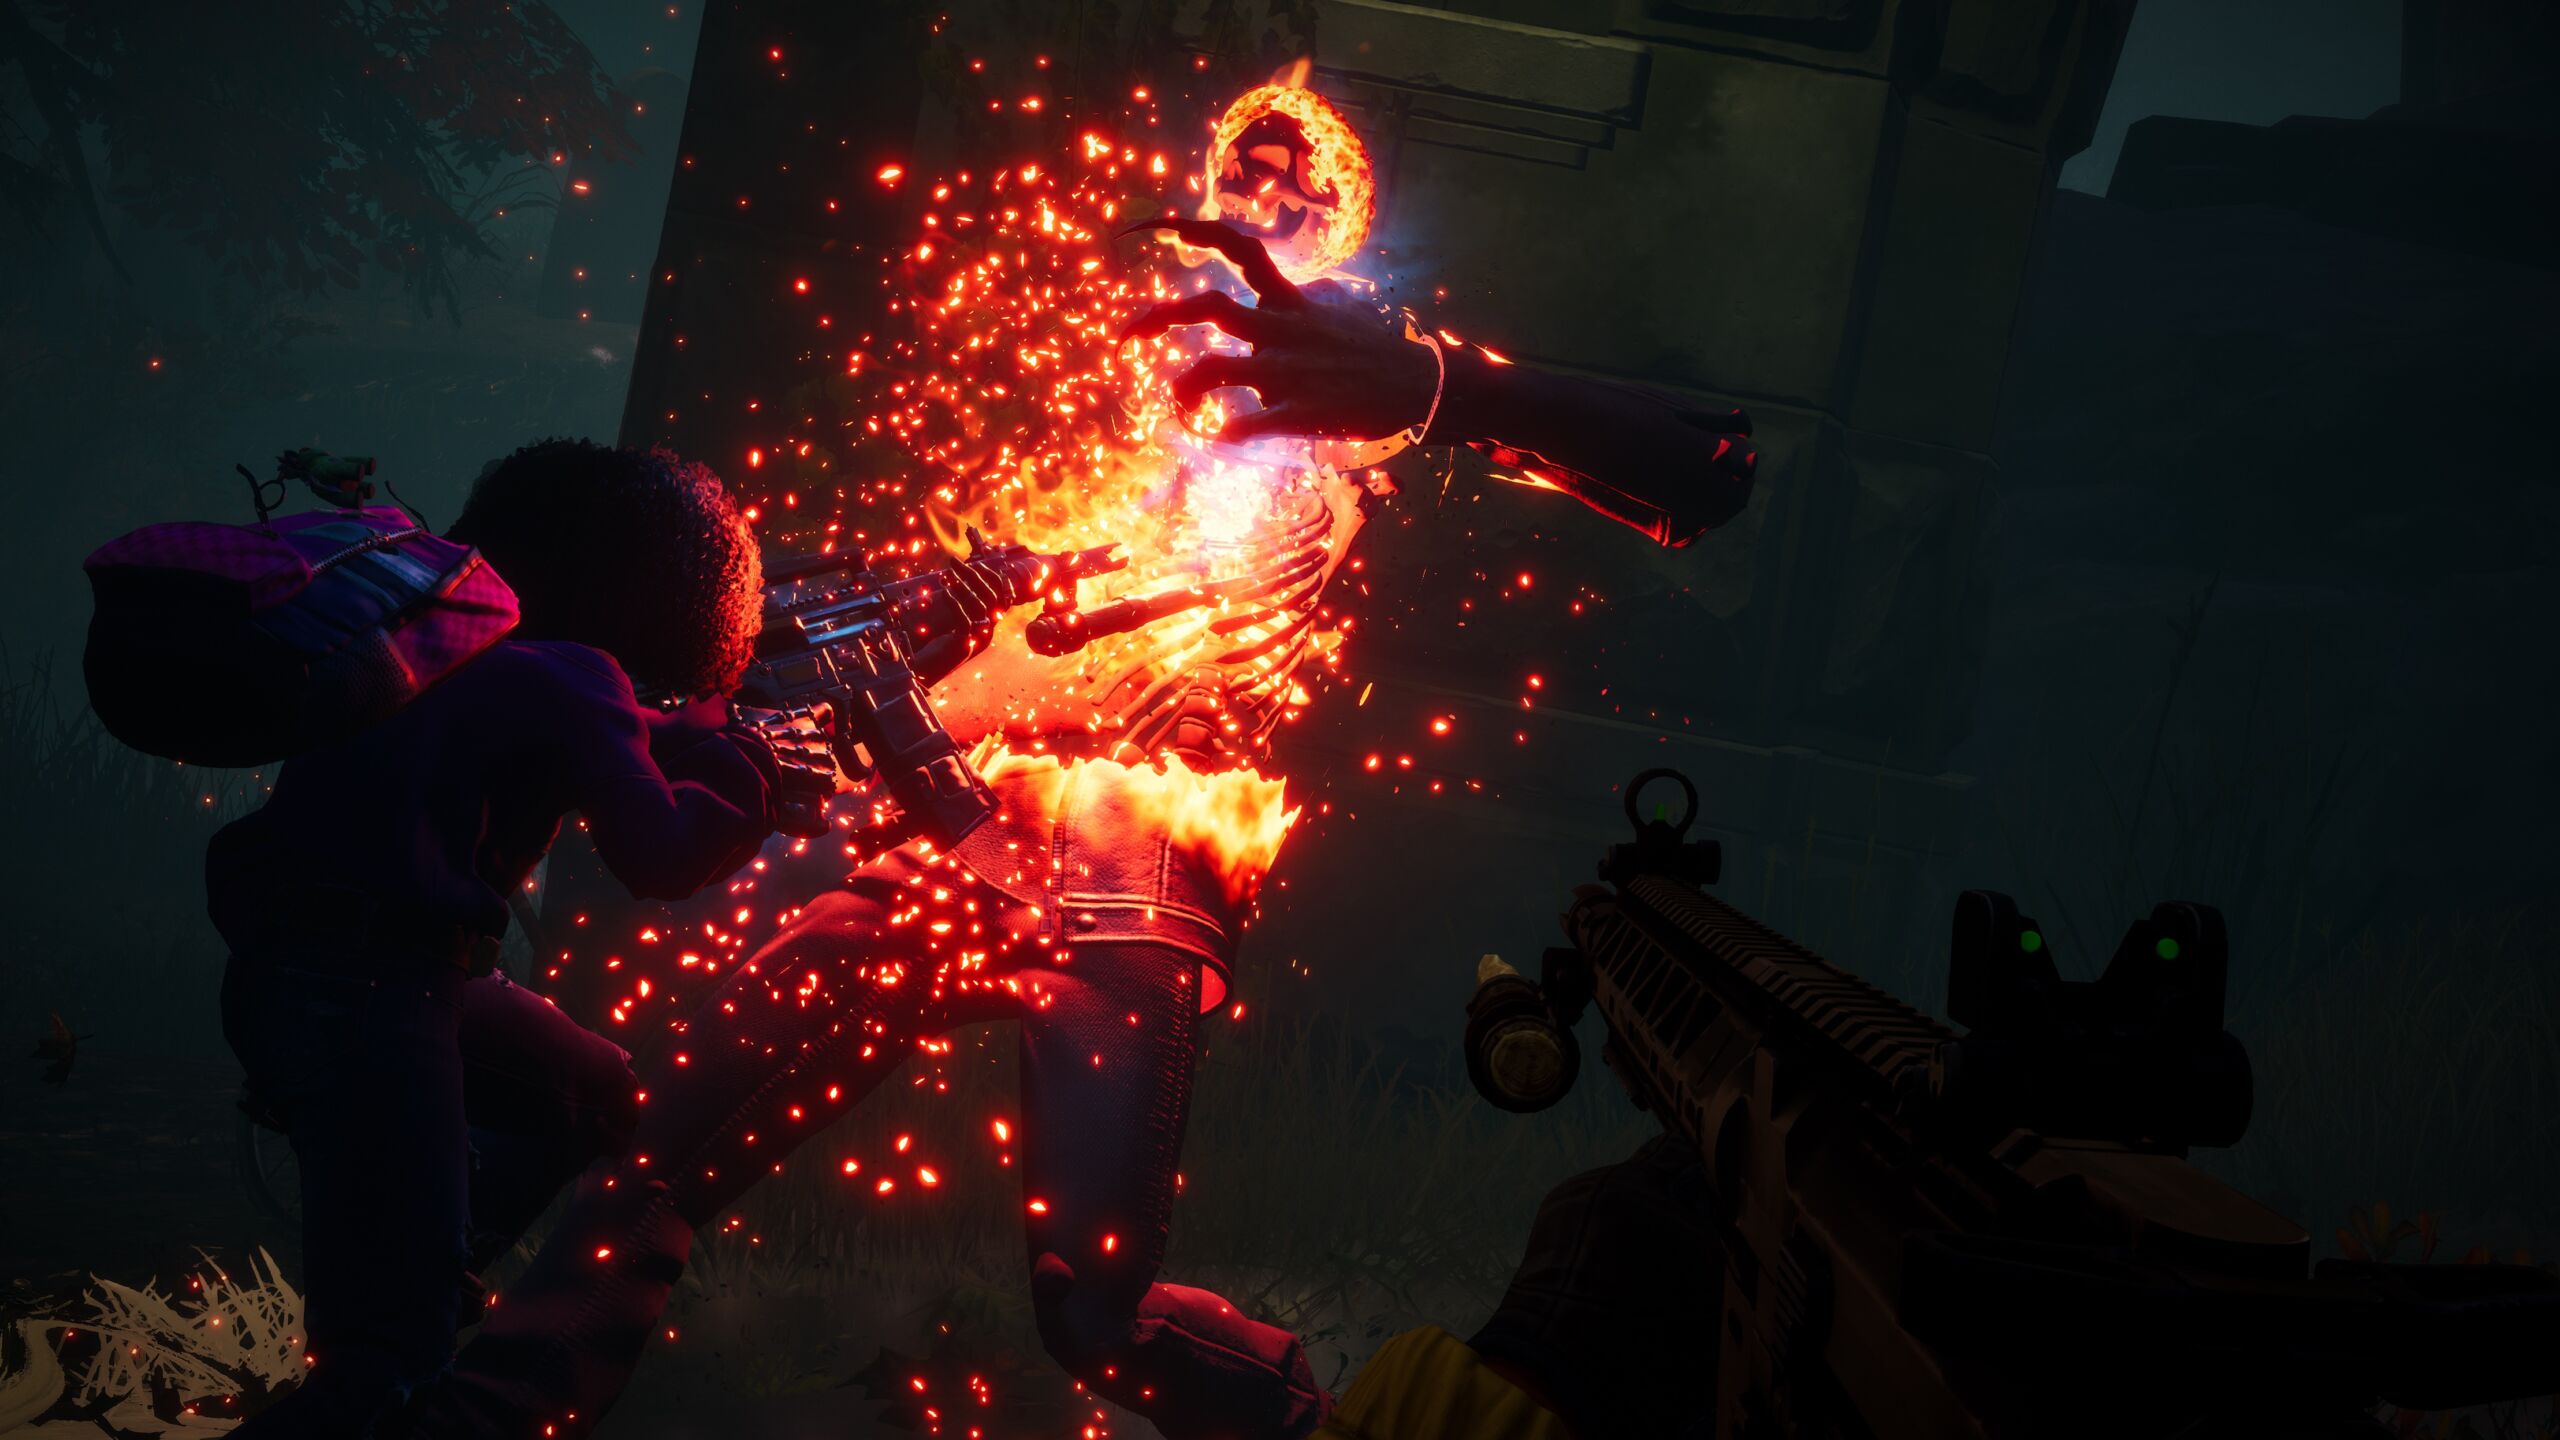 Redfall offers a compelling mix of Dishonored, Borderlands, and